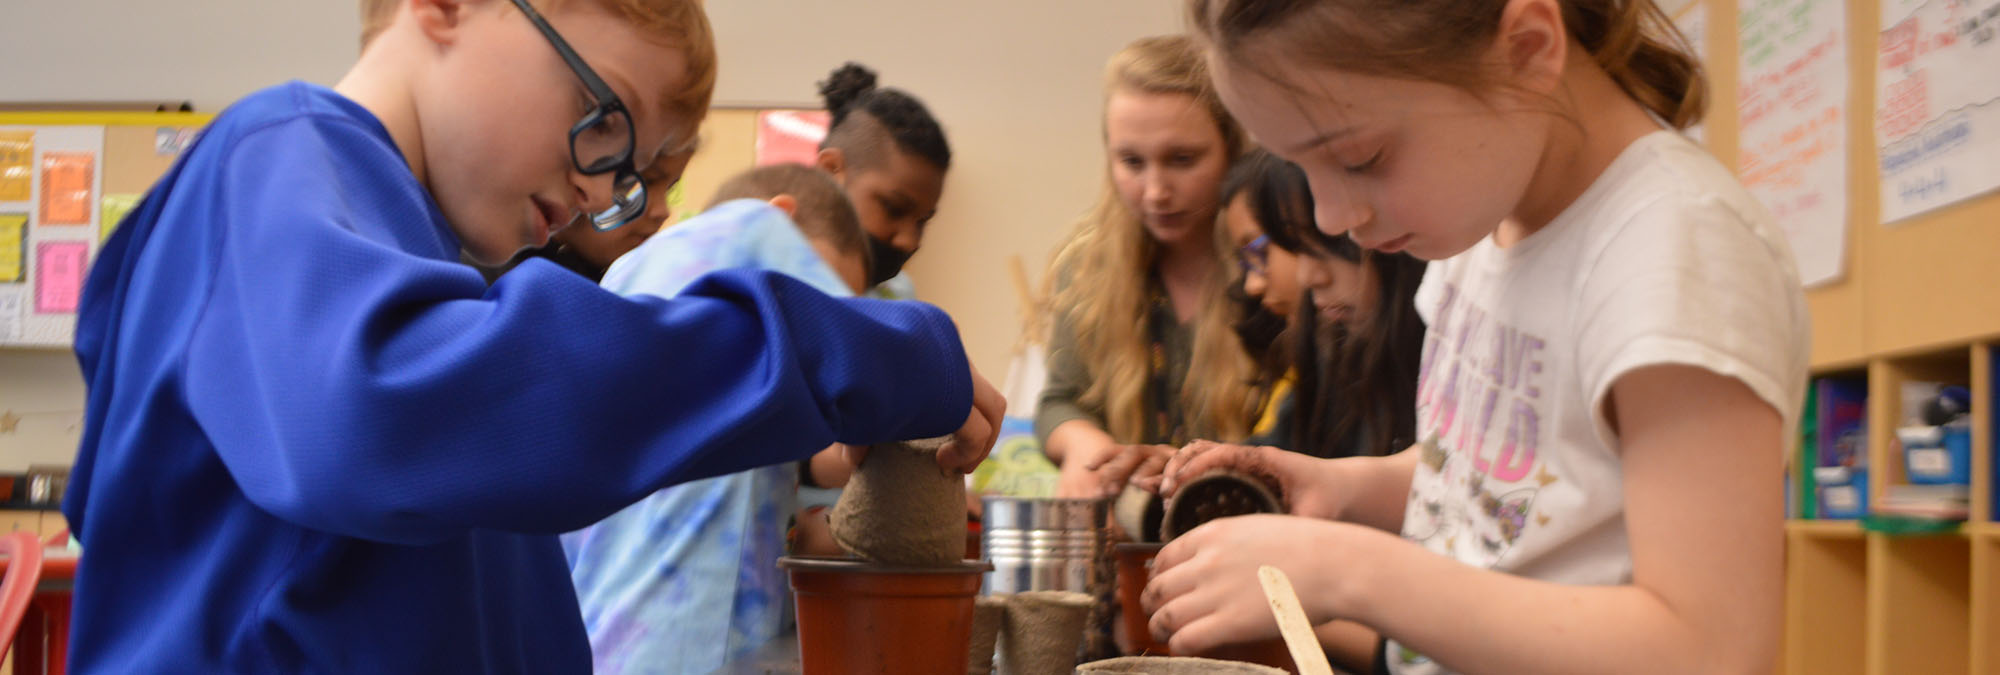 Students plant seeds in pots of dirt in classroom